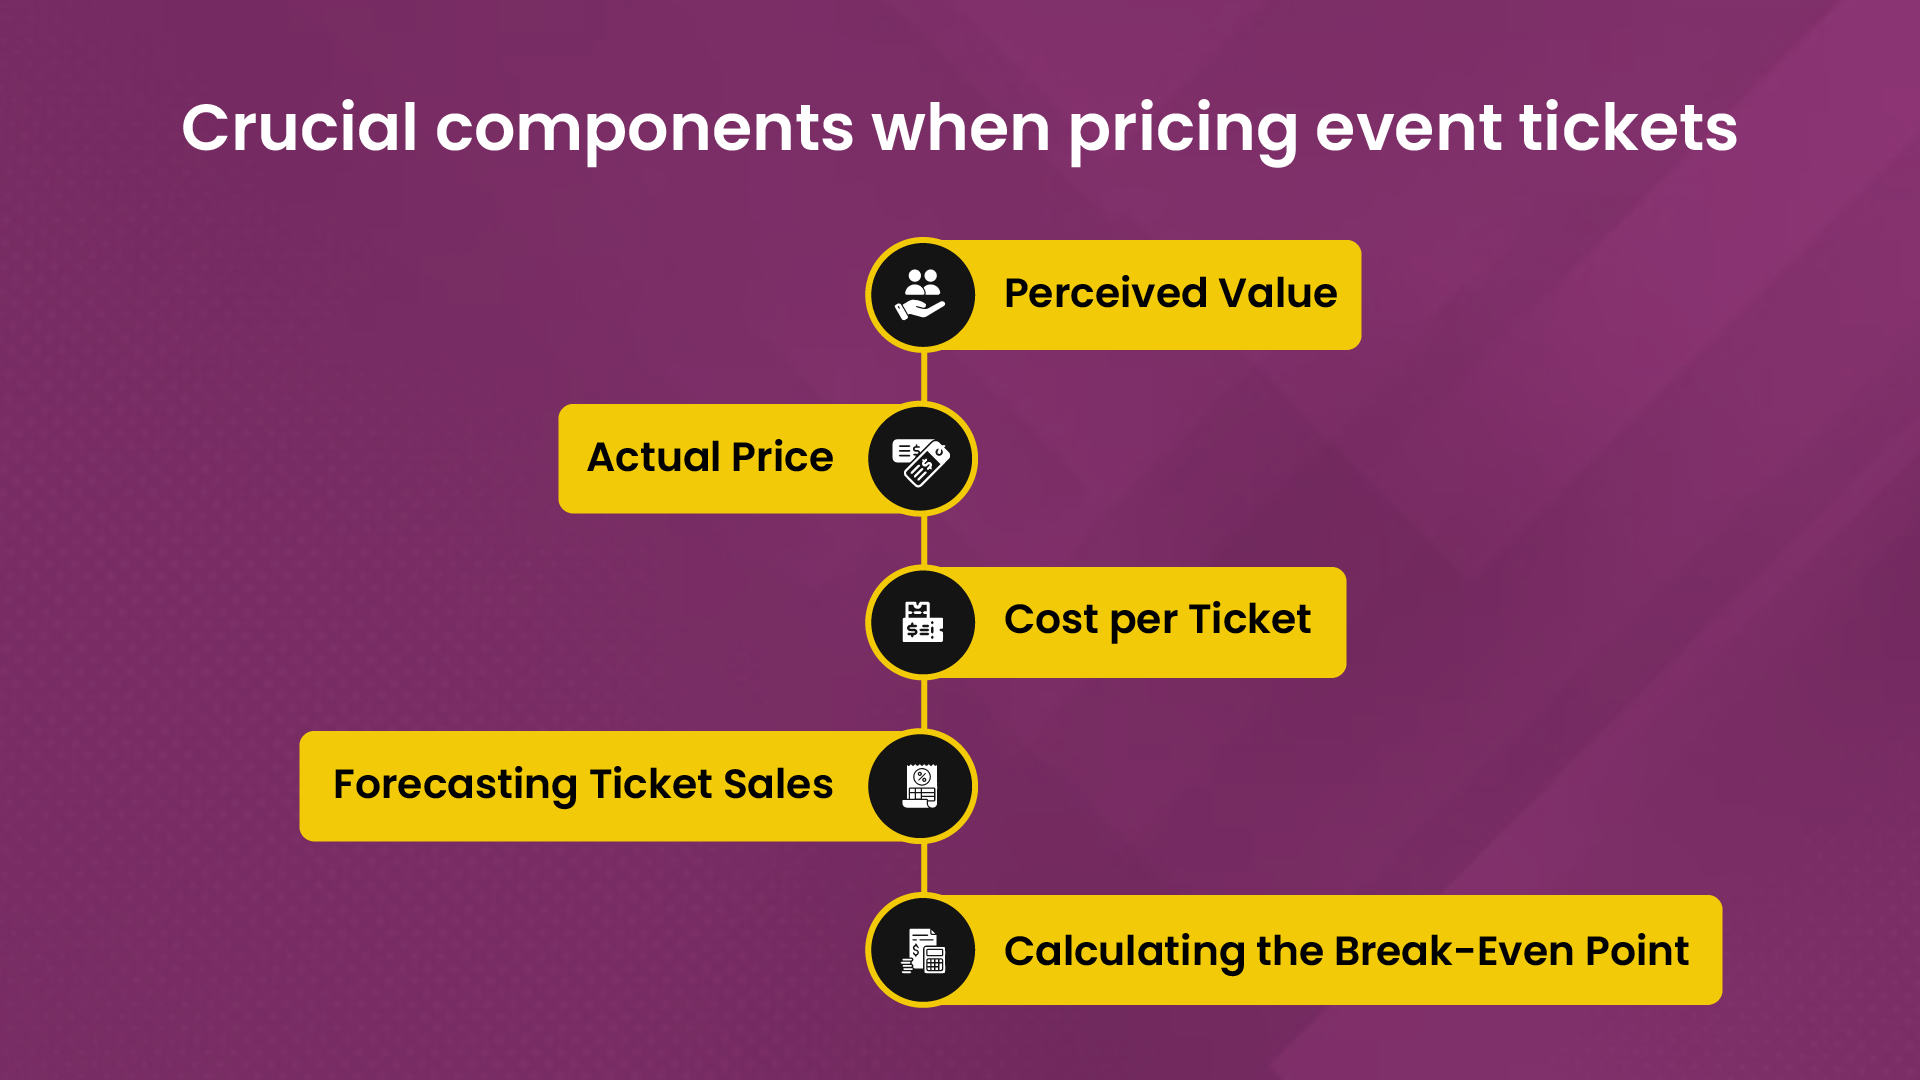 Crucial components when pricing event tickets